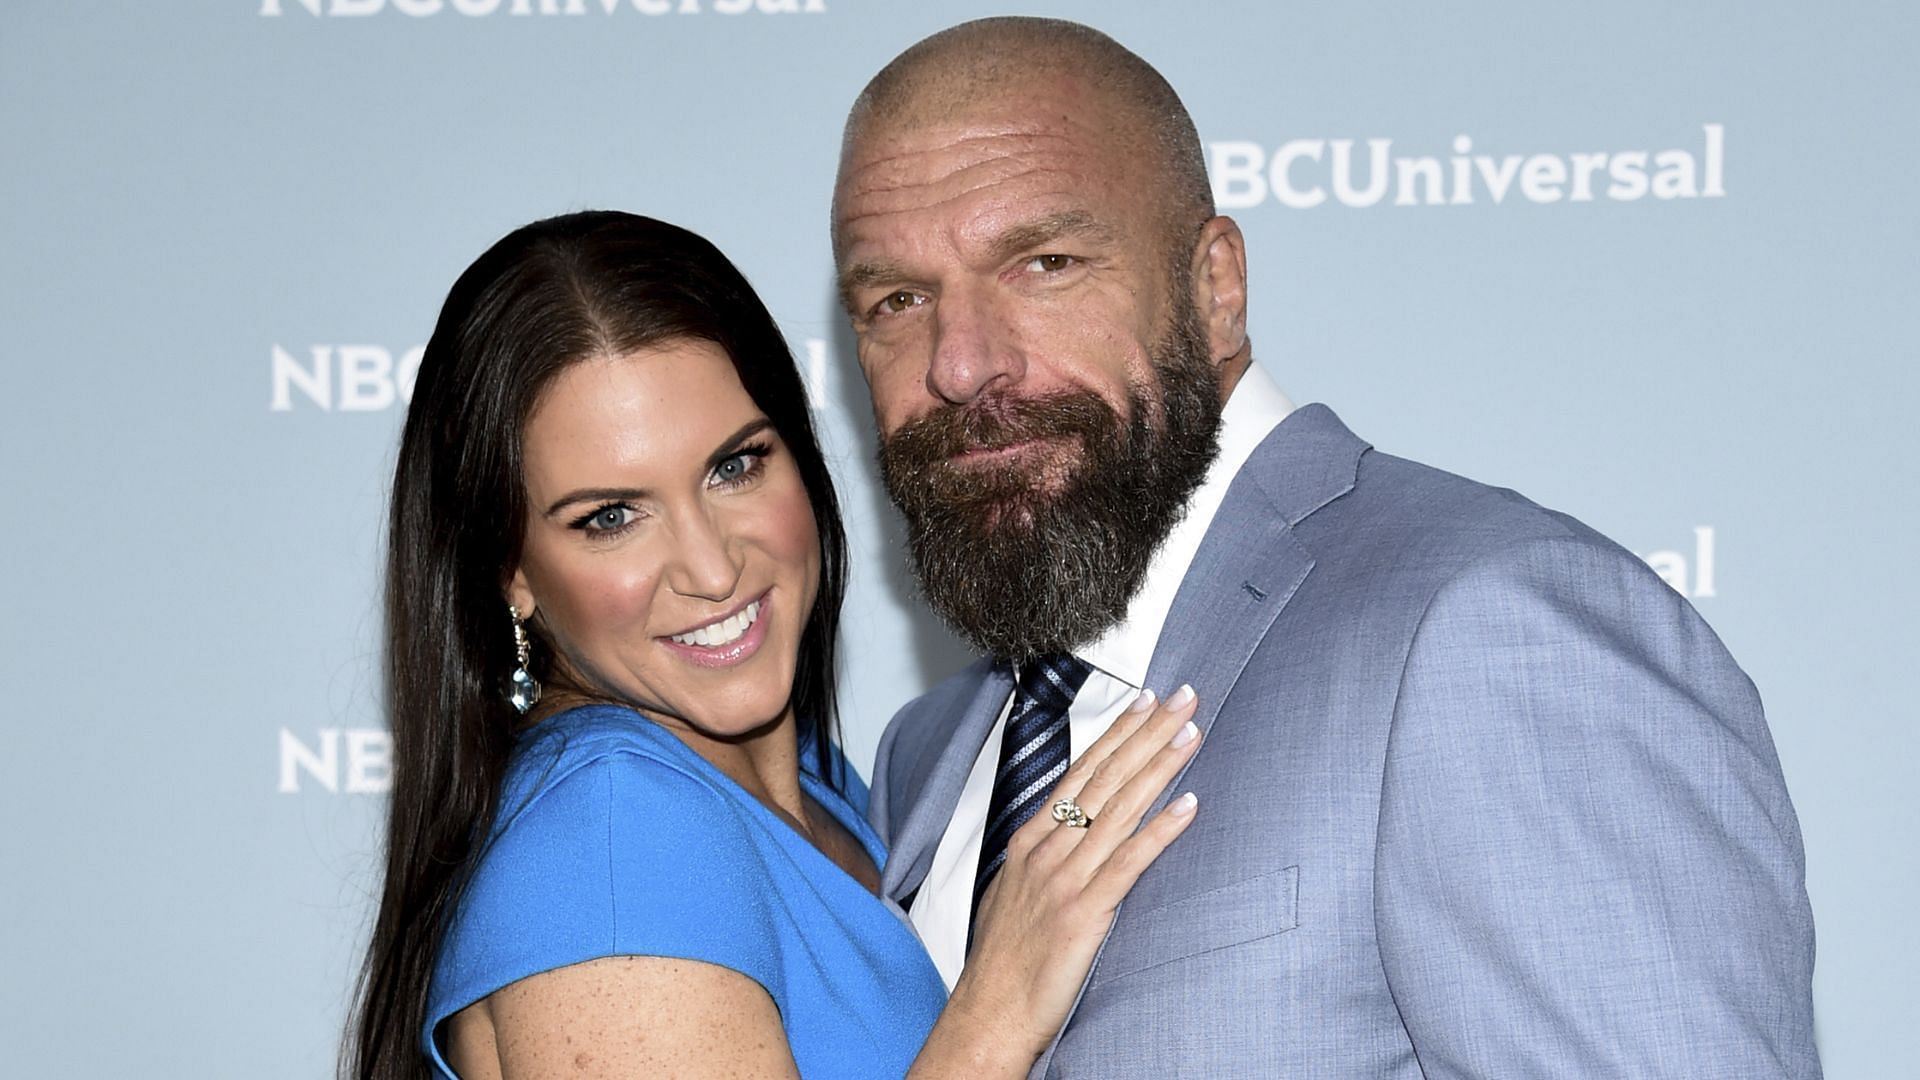 Stephanie McMahon and Triple H posing for a picture.